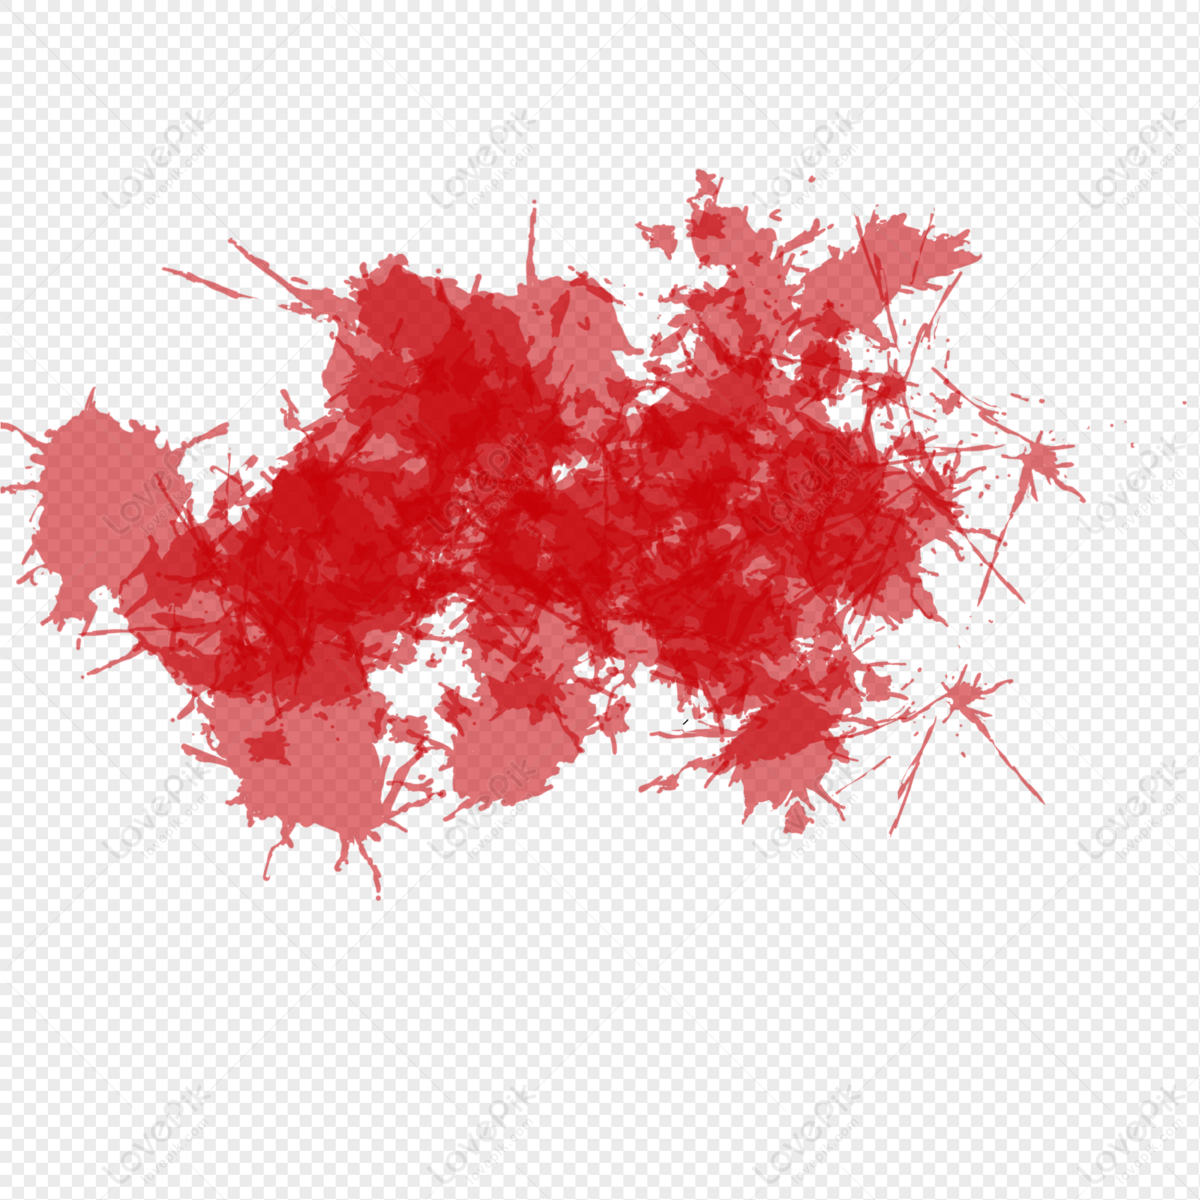 blood effect photoshop action free download